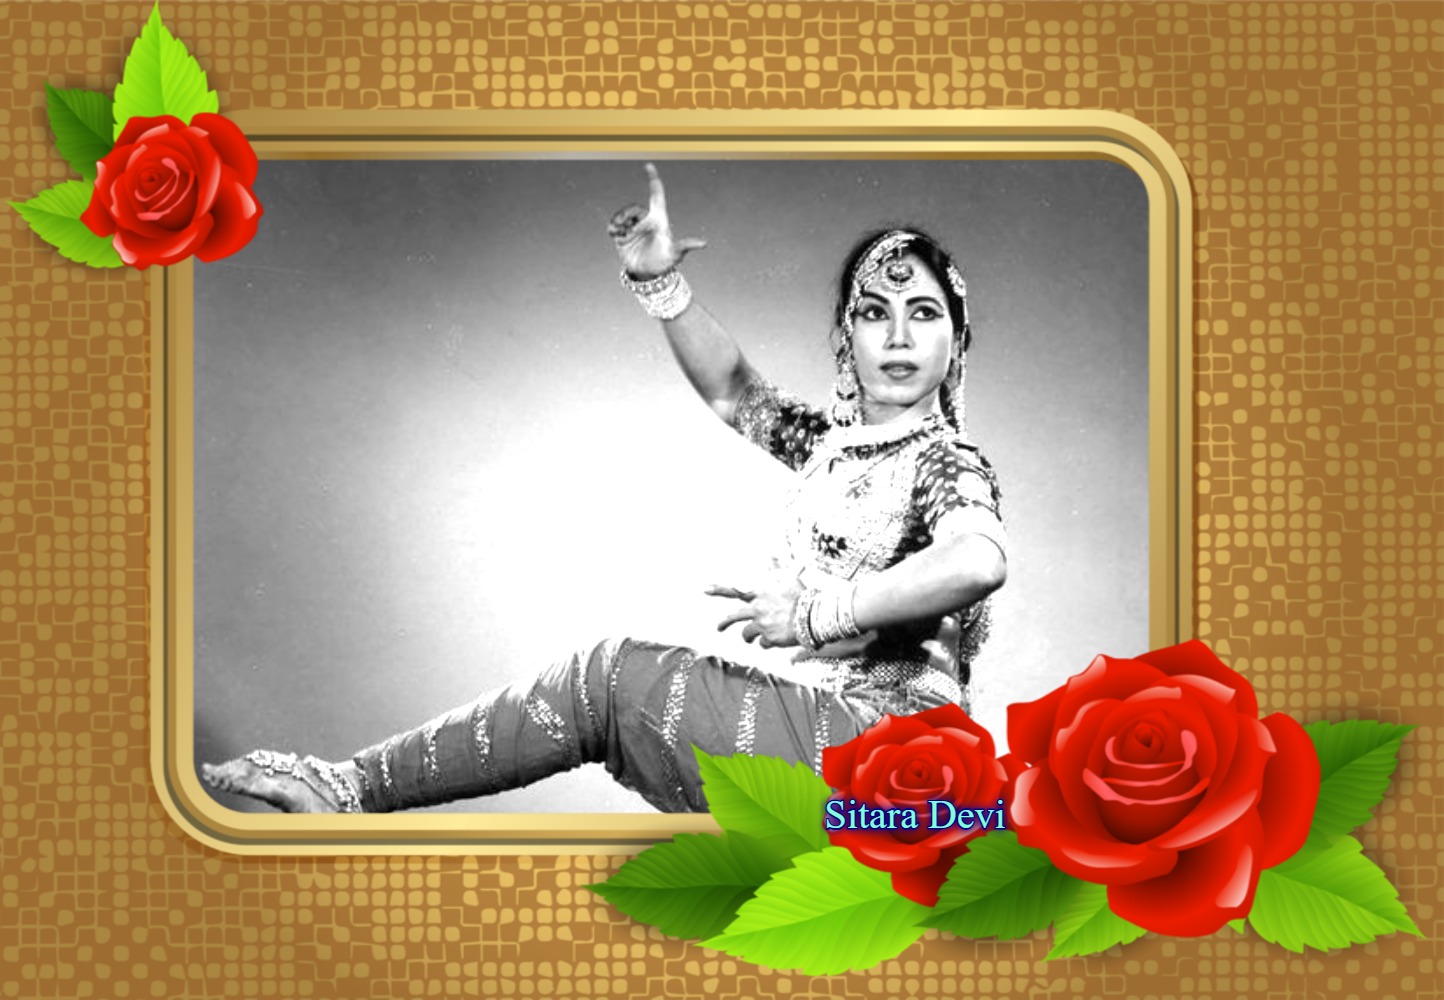 You are currently viewing “Classical Dancing Legend Sitara Devi”